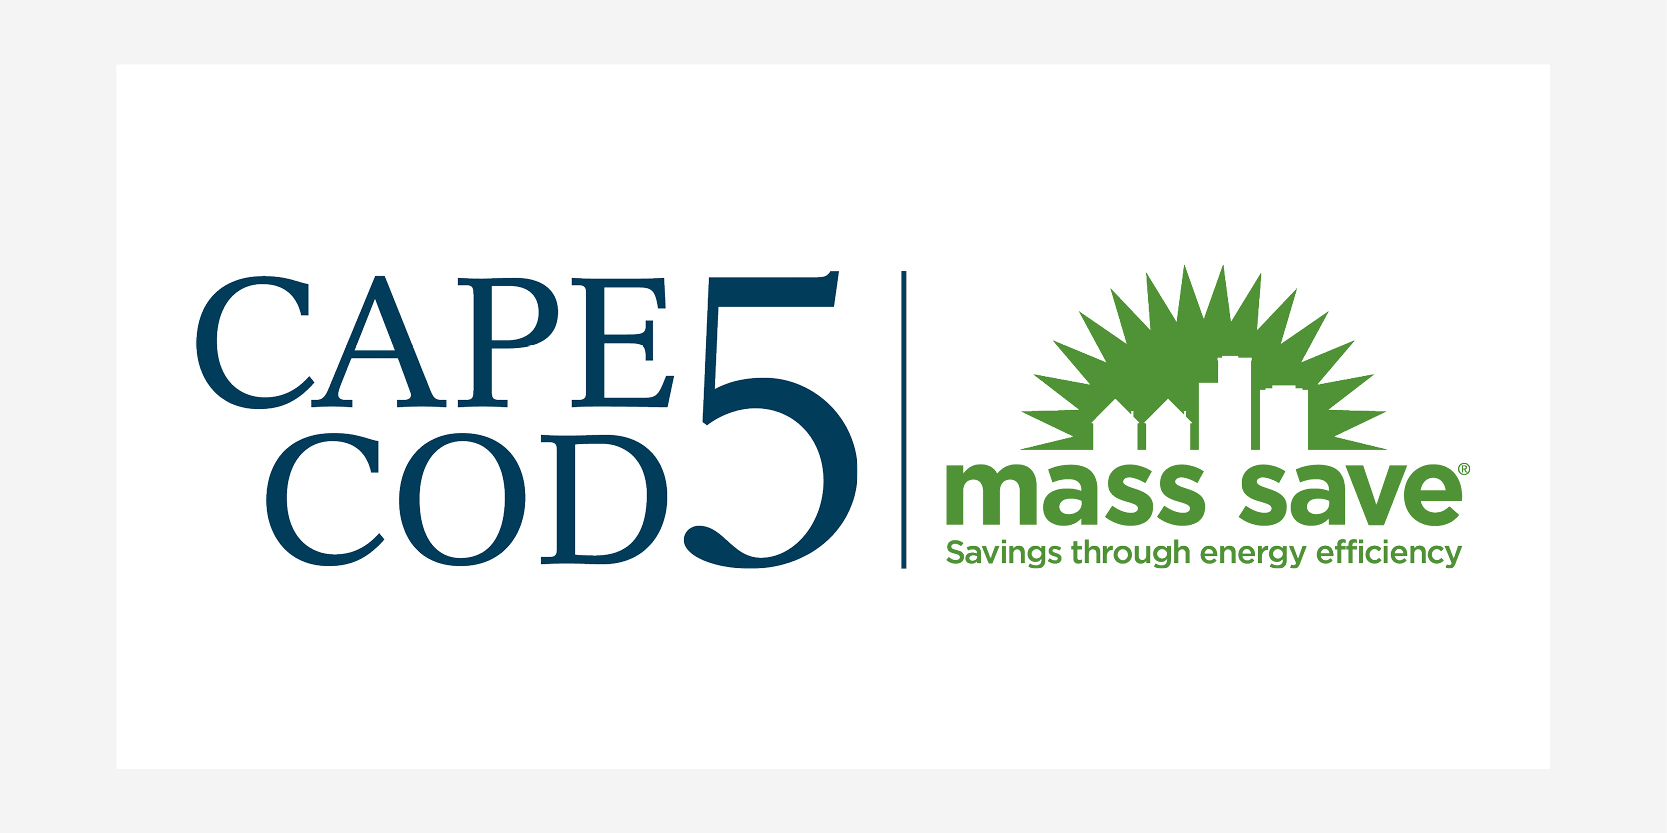 Cape Cod 5 and Mass Save® logos